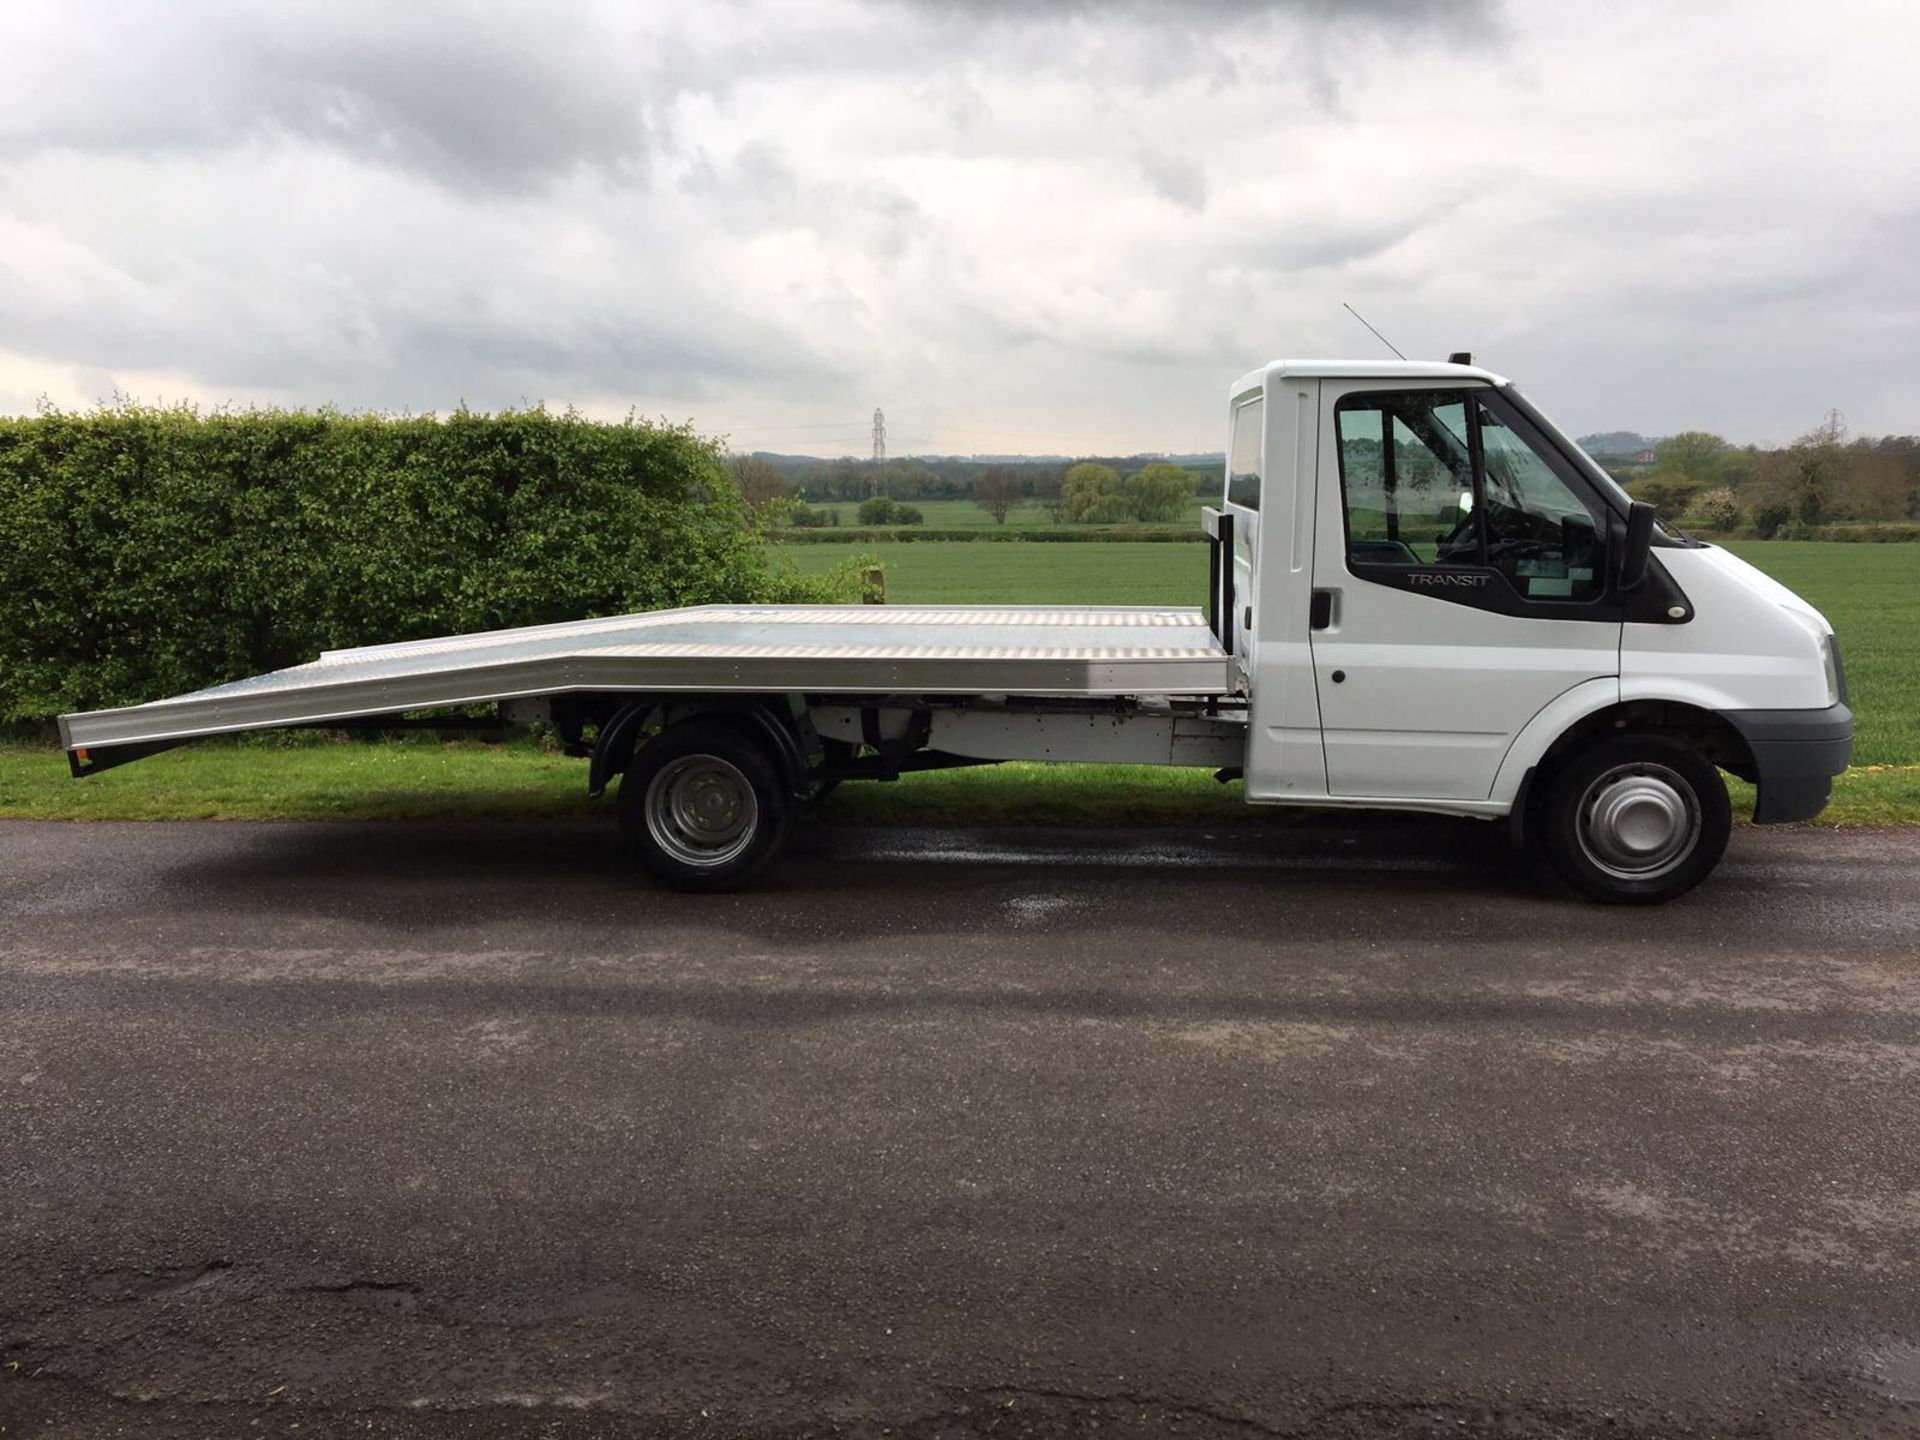 2008/58 REG FORD TRANSIT 100 T350M RWD RECOVERY VEHICLE 14FOOT BED LENGTH - Image 4 of 10